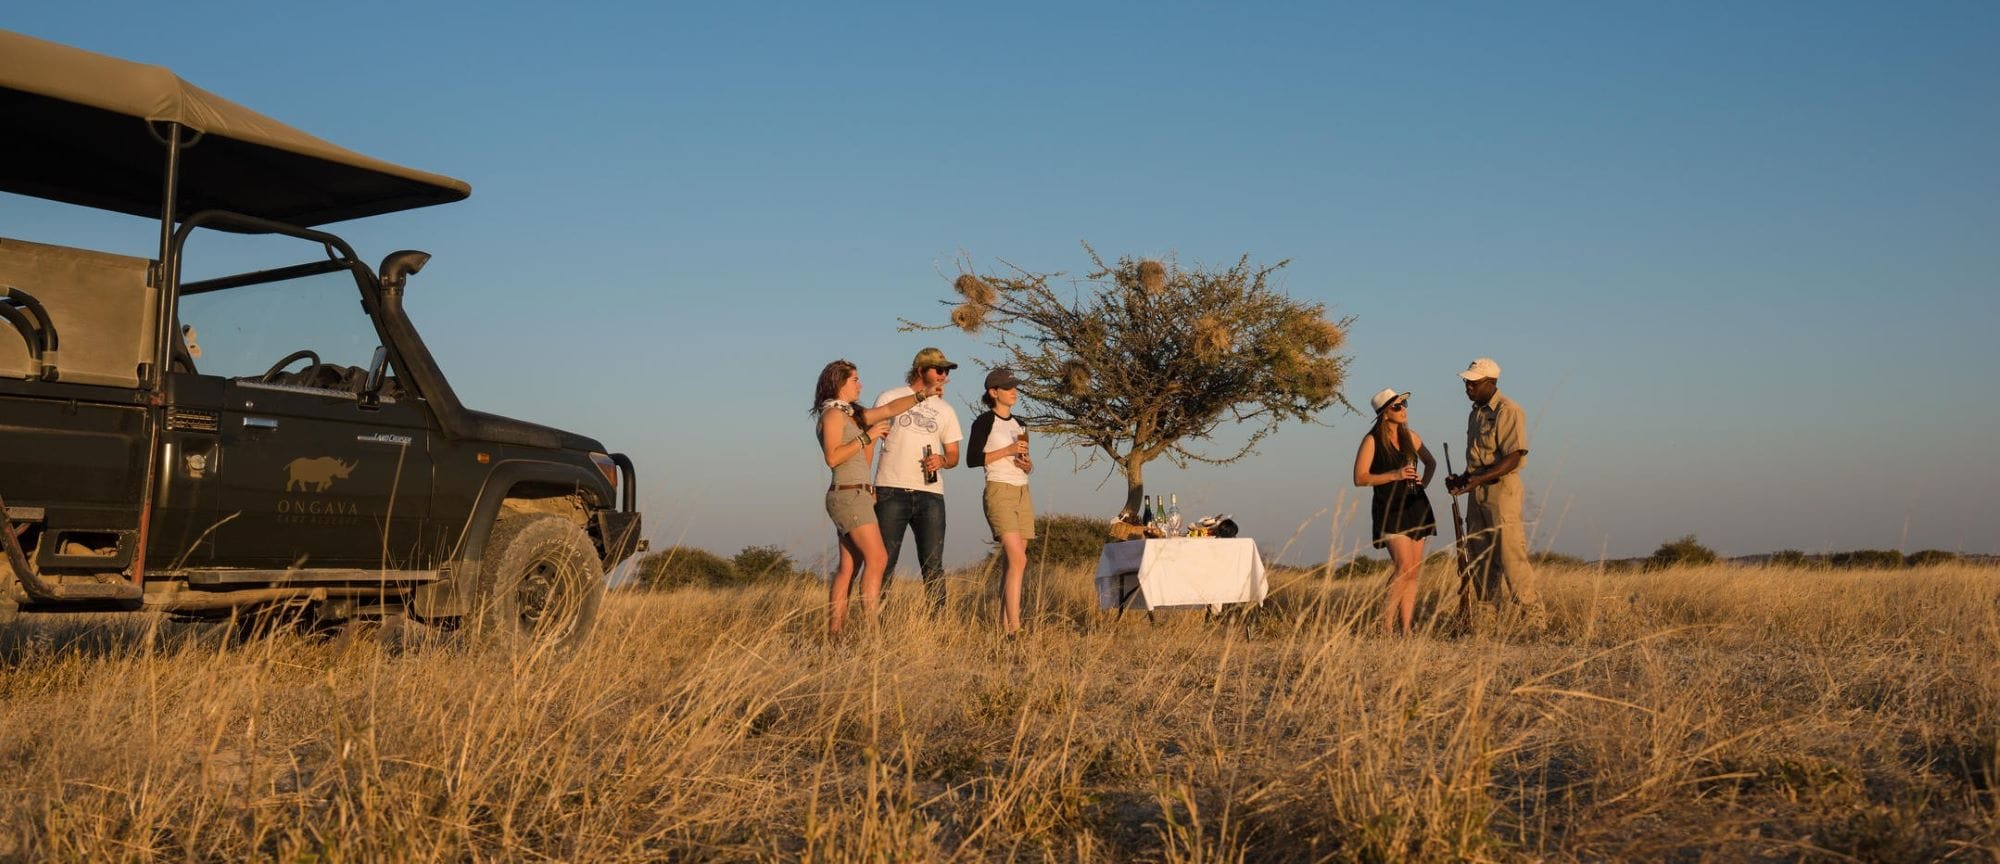 Sundowner stop Ongave Game Reserve - African Luxury